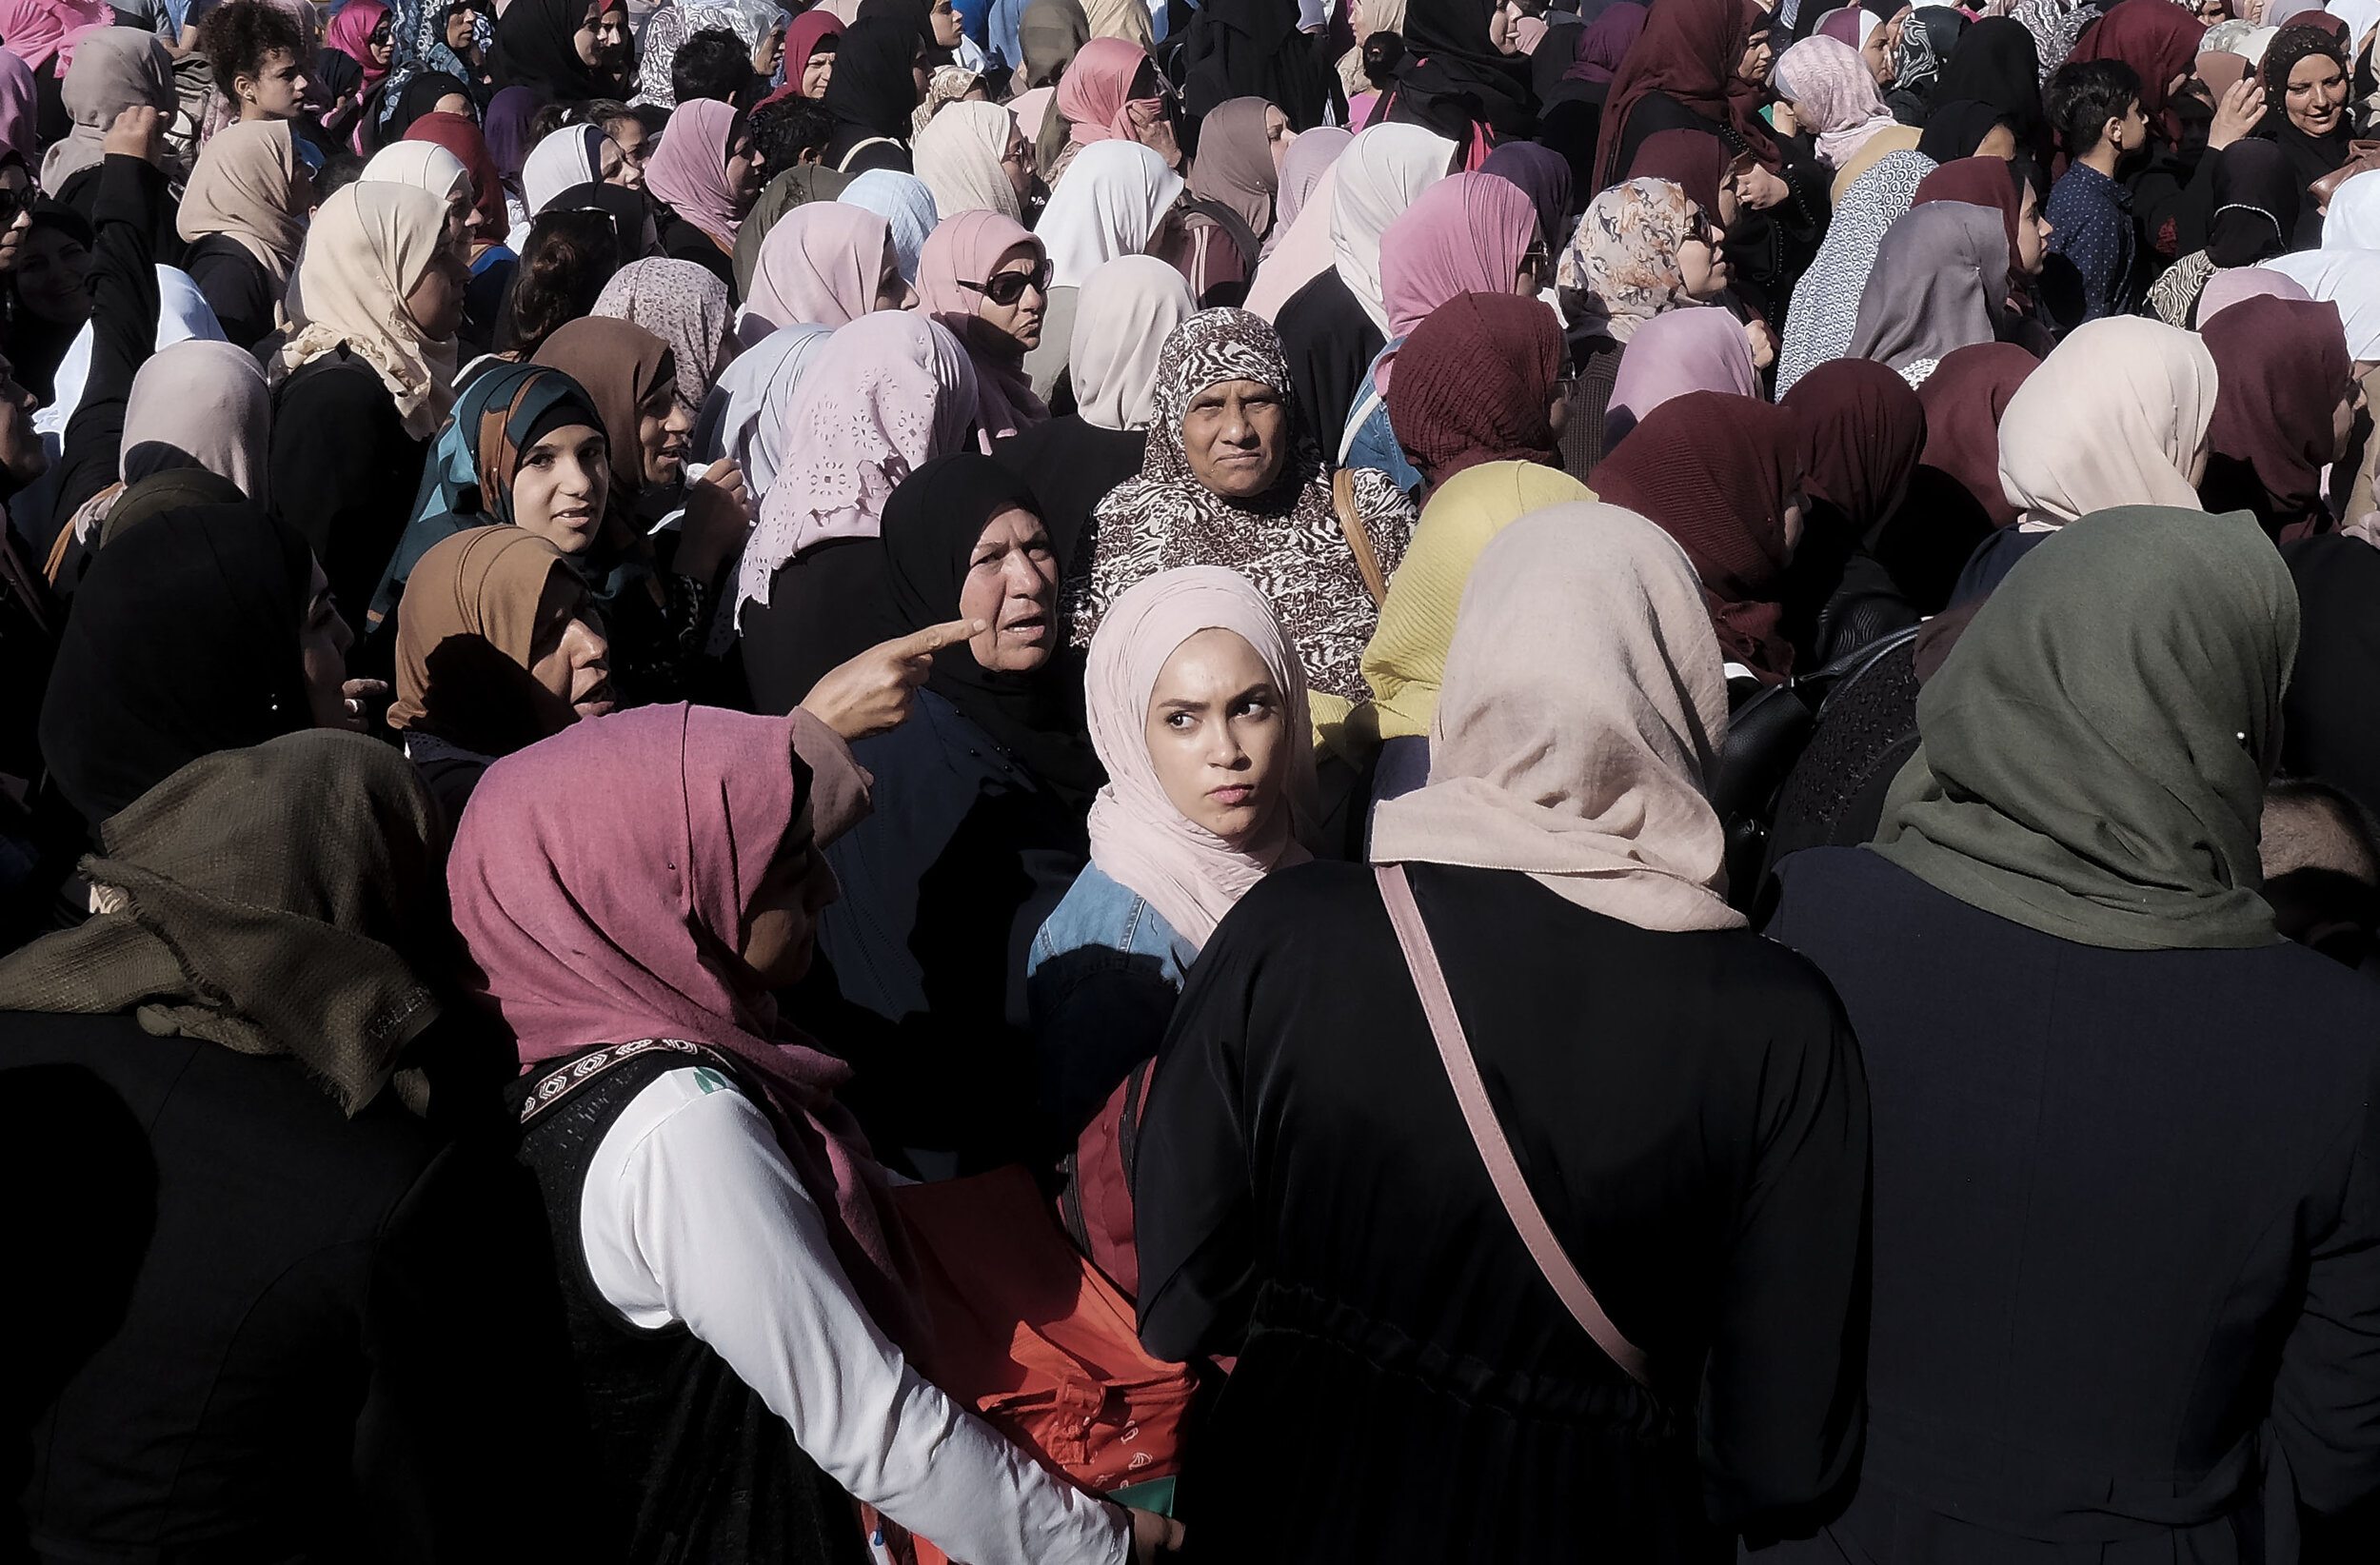  A Palestinian woman waits in a sea of other Palestinians to cross Qalandia Checkpoint which separates Israel from the Occupied West Bank. Each day millions cross through the checkpoint to work, visit relatives, or attend prayer at Al Aqsa Mosque in 